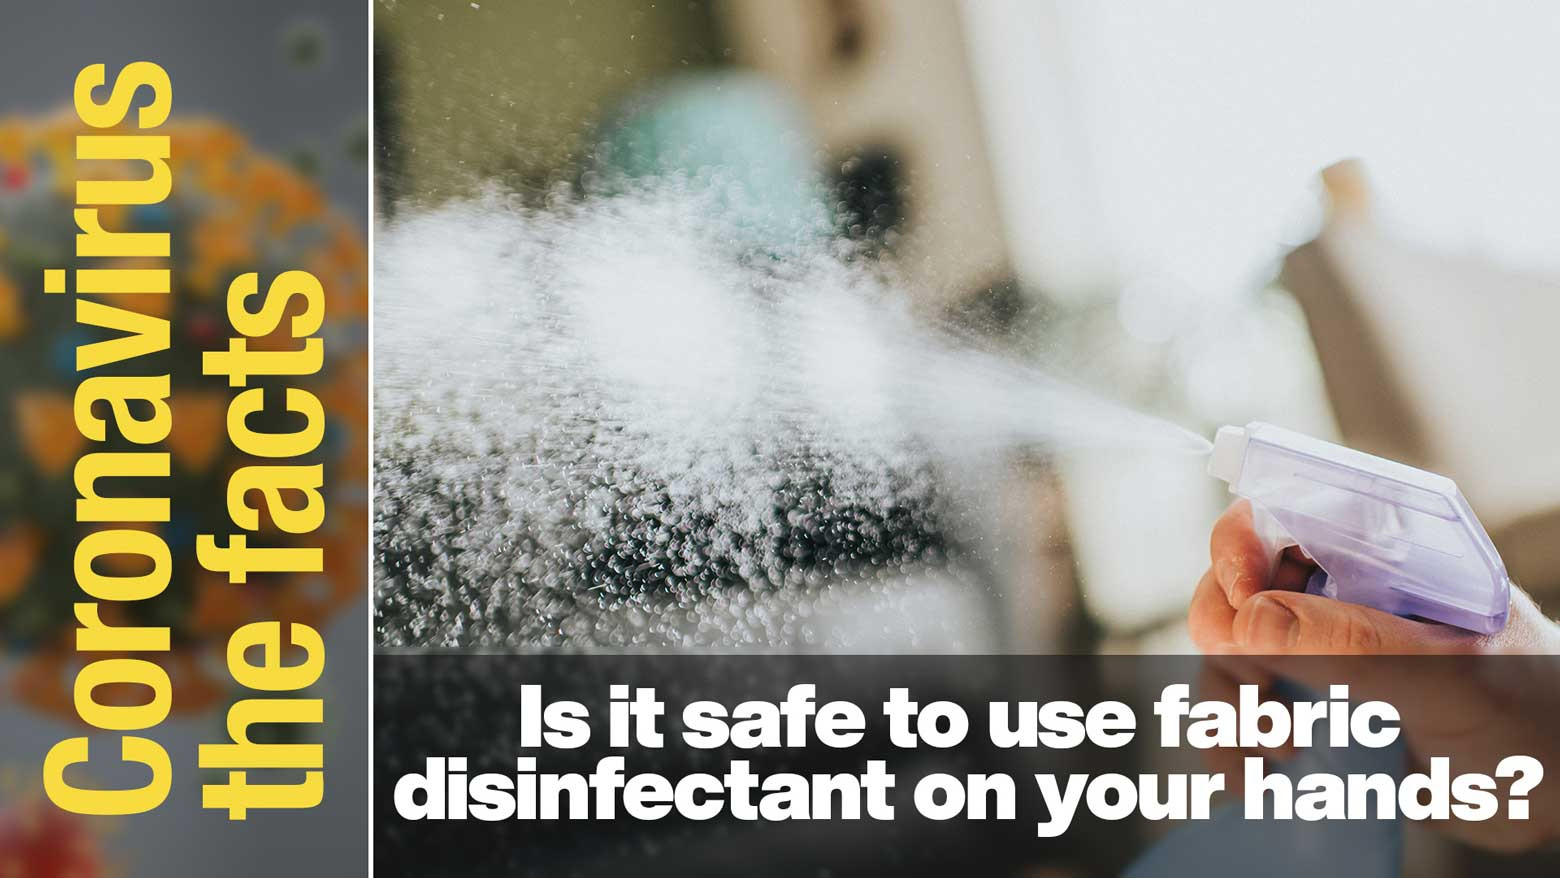 Can fabric disinfectant be used to sanitize your hands?